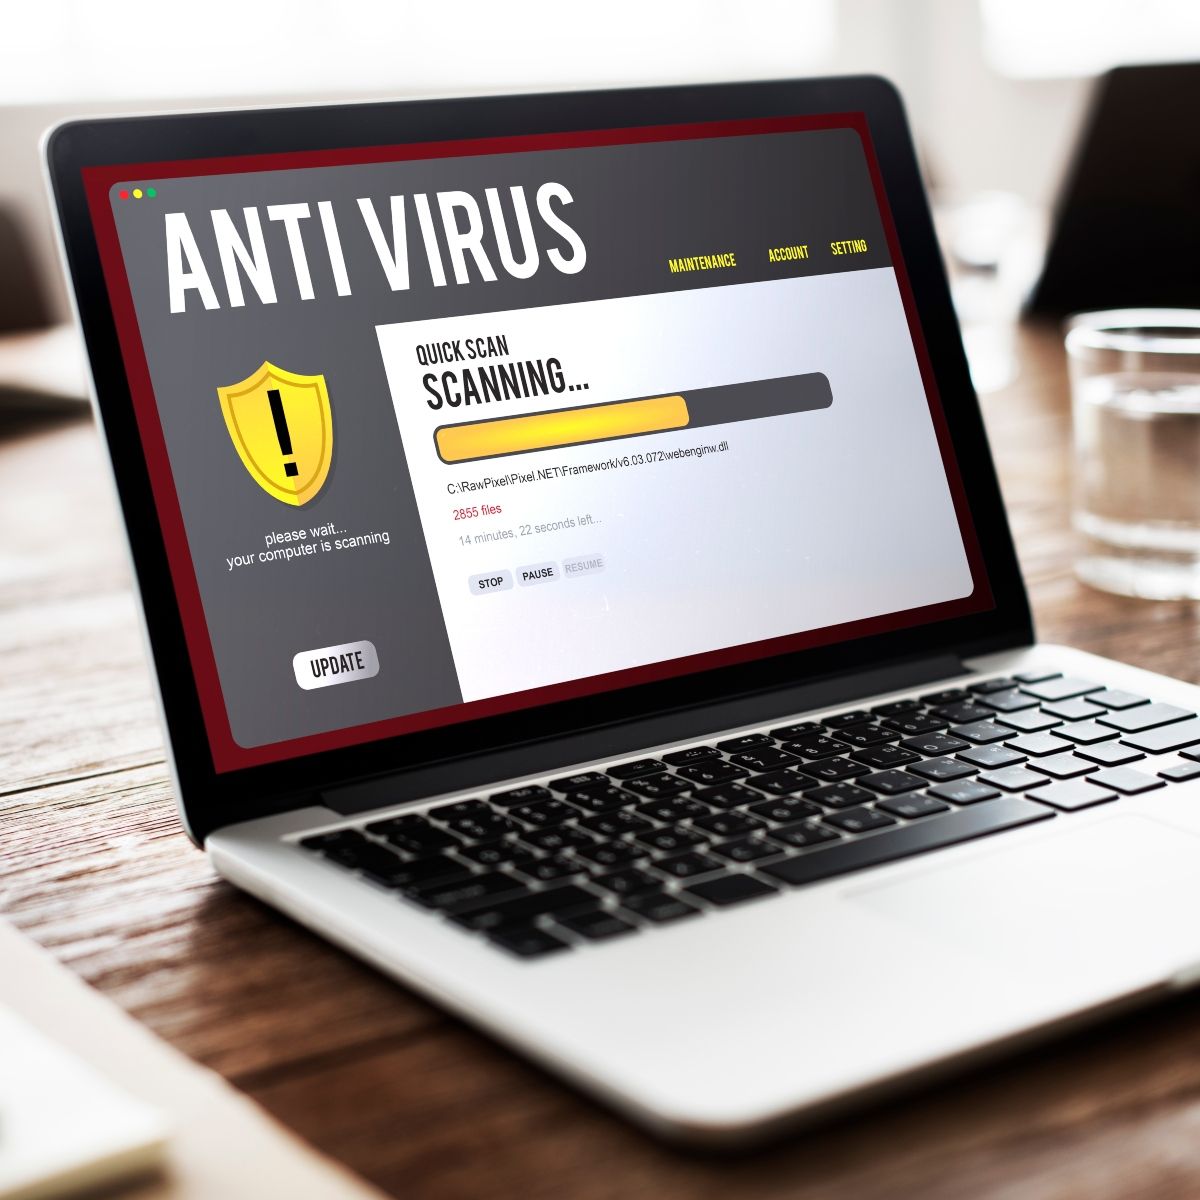 what-are-some-of-the-shortcomings-of-antivirus-software-today-check-all-that-apply